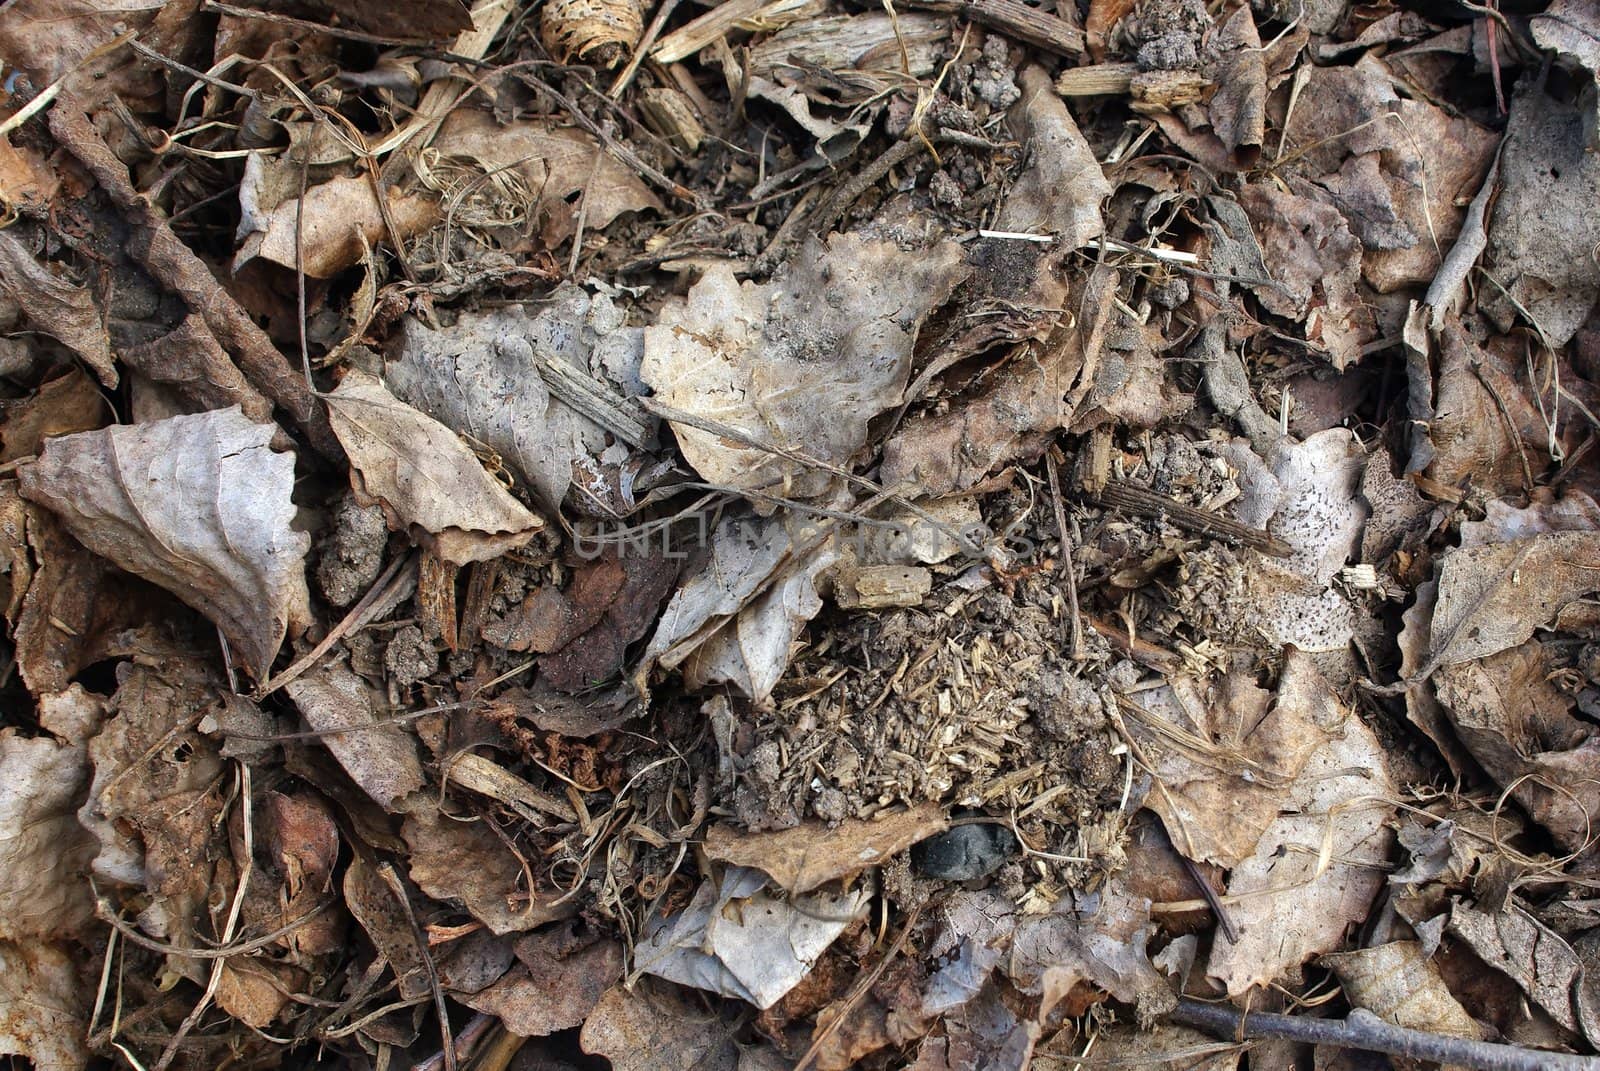 Pile of grey dry leaves in early spring by Vitamin